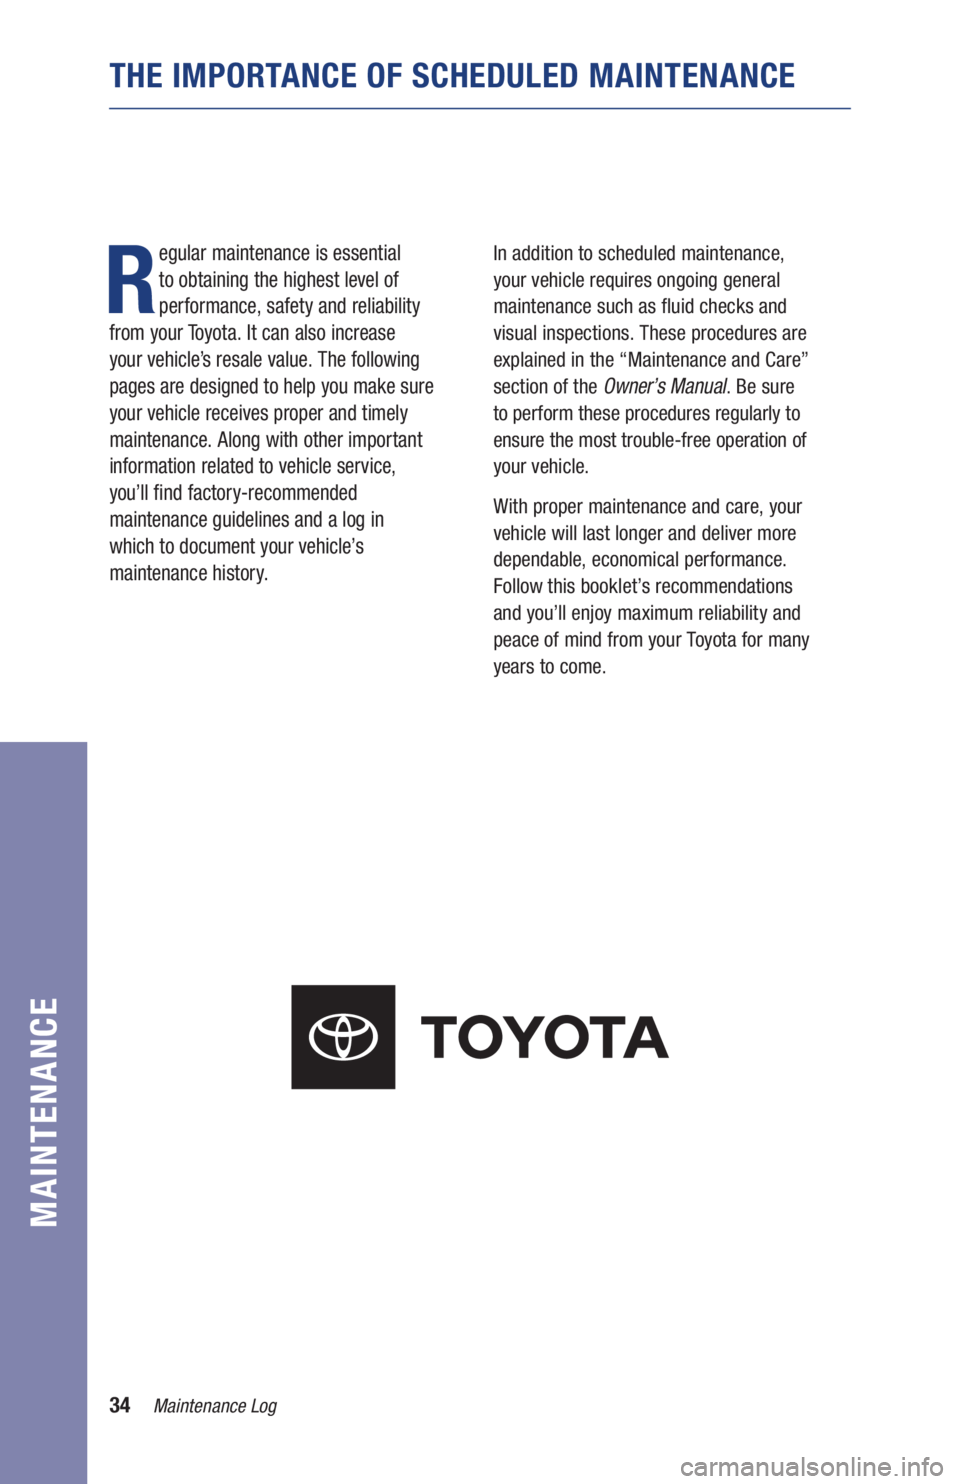 TOYOTA AVALON 2021  Warranties & Maintenance Guides (in English) 34Maintenance Log
MAINTENANCE
THE IMPORTANCE OF SCHEDULED MAINTENANCE
R
egular maintenance is essential  
to obtaining the highest level of 
performance, safety and reliability   
from your Toyota. It